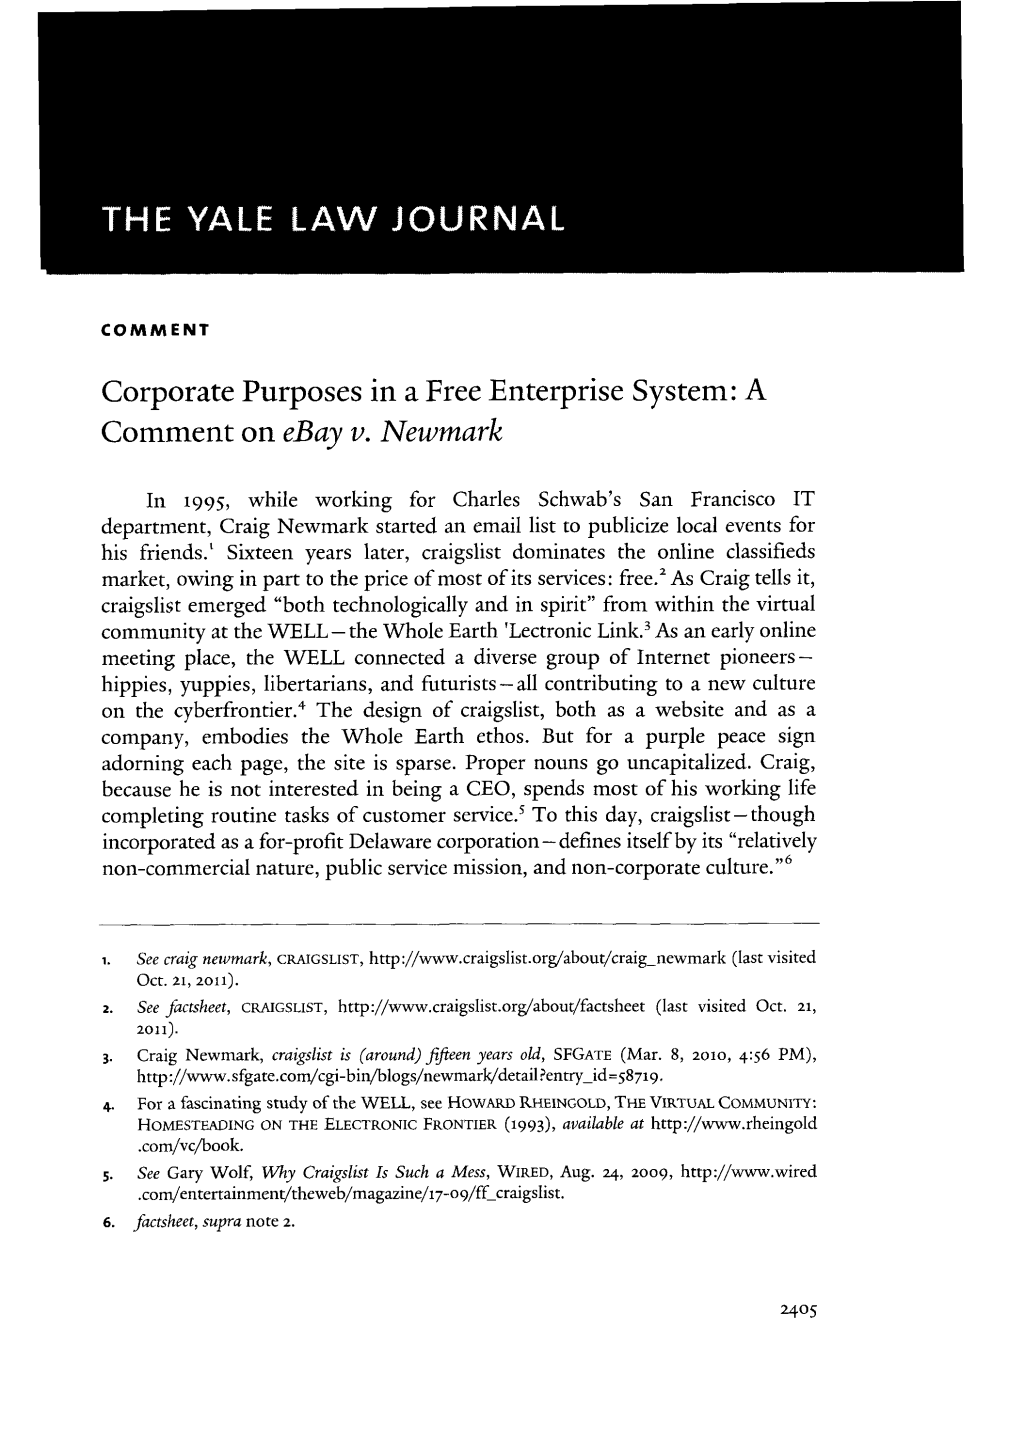 Corporate Purposes in a Free Enterprise System: a Comment on Ebay V. Newmark